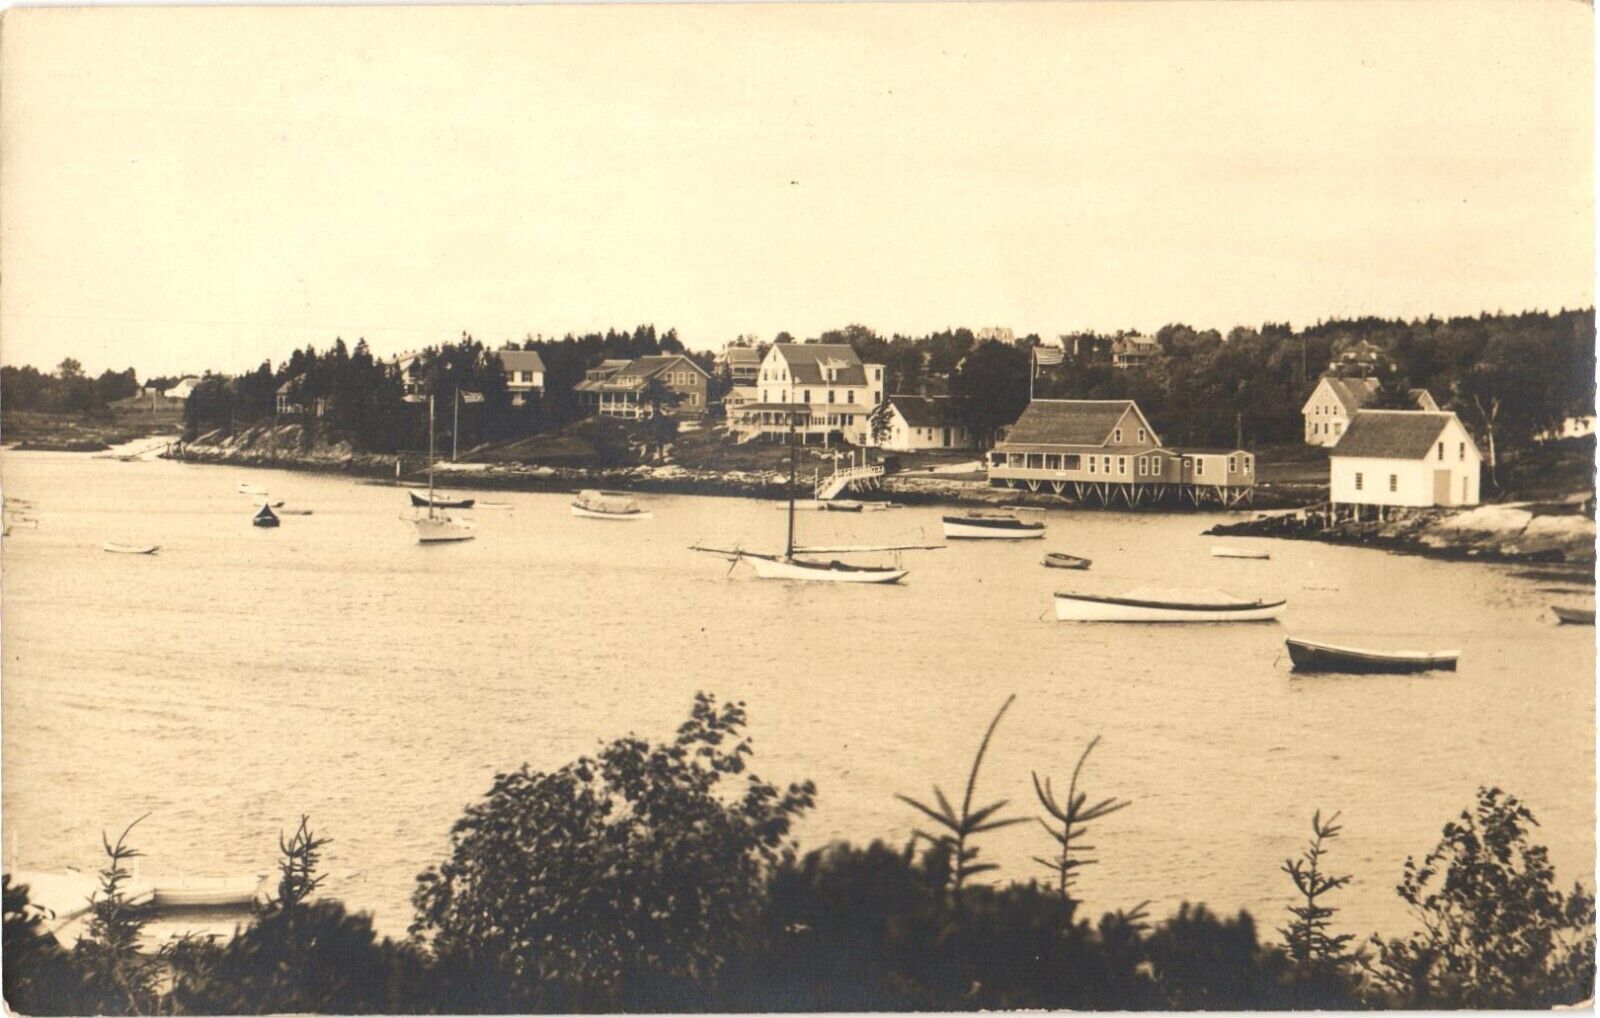 Bird's Eye View of Boats And Houses By The Sea, An Old Photograph Postcard